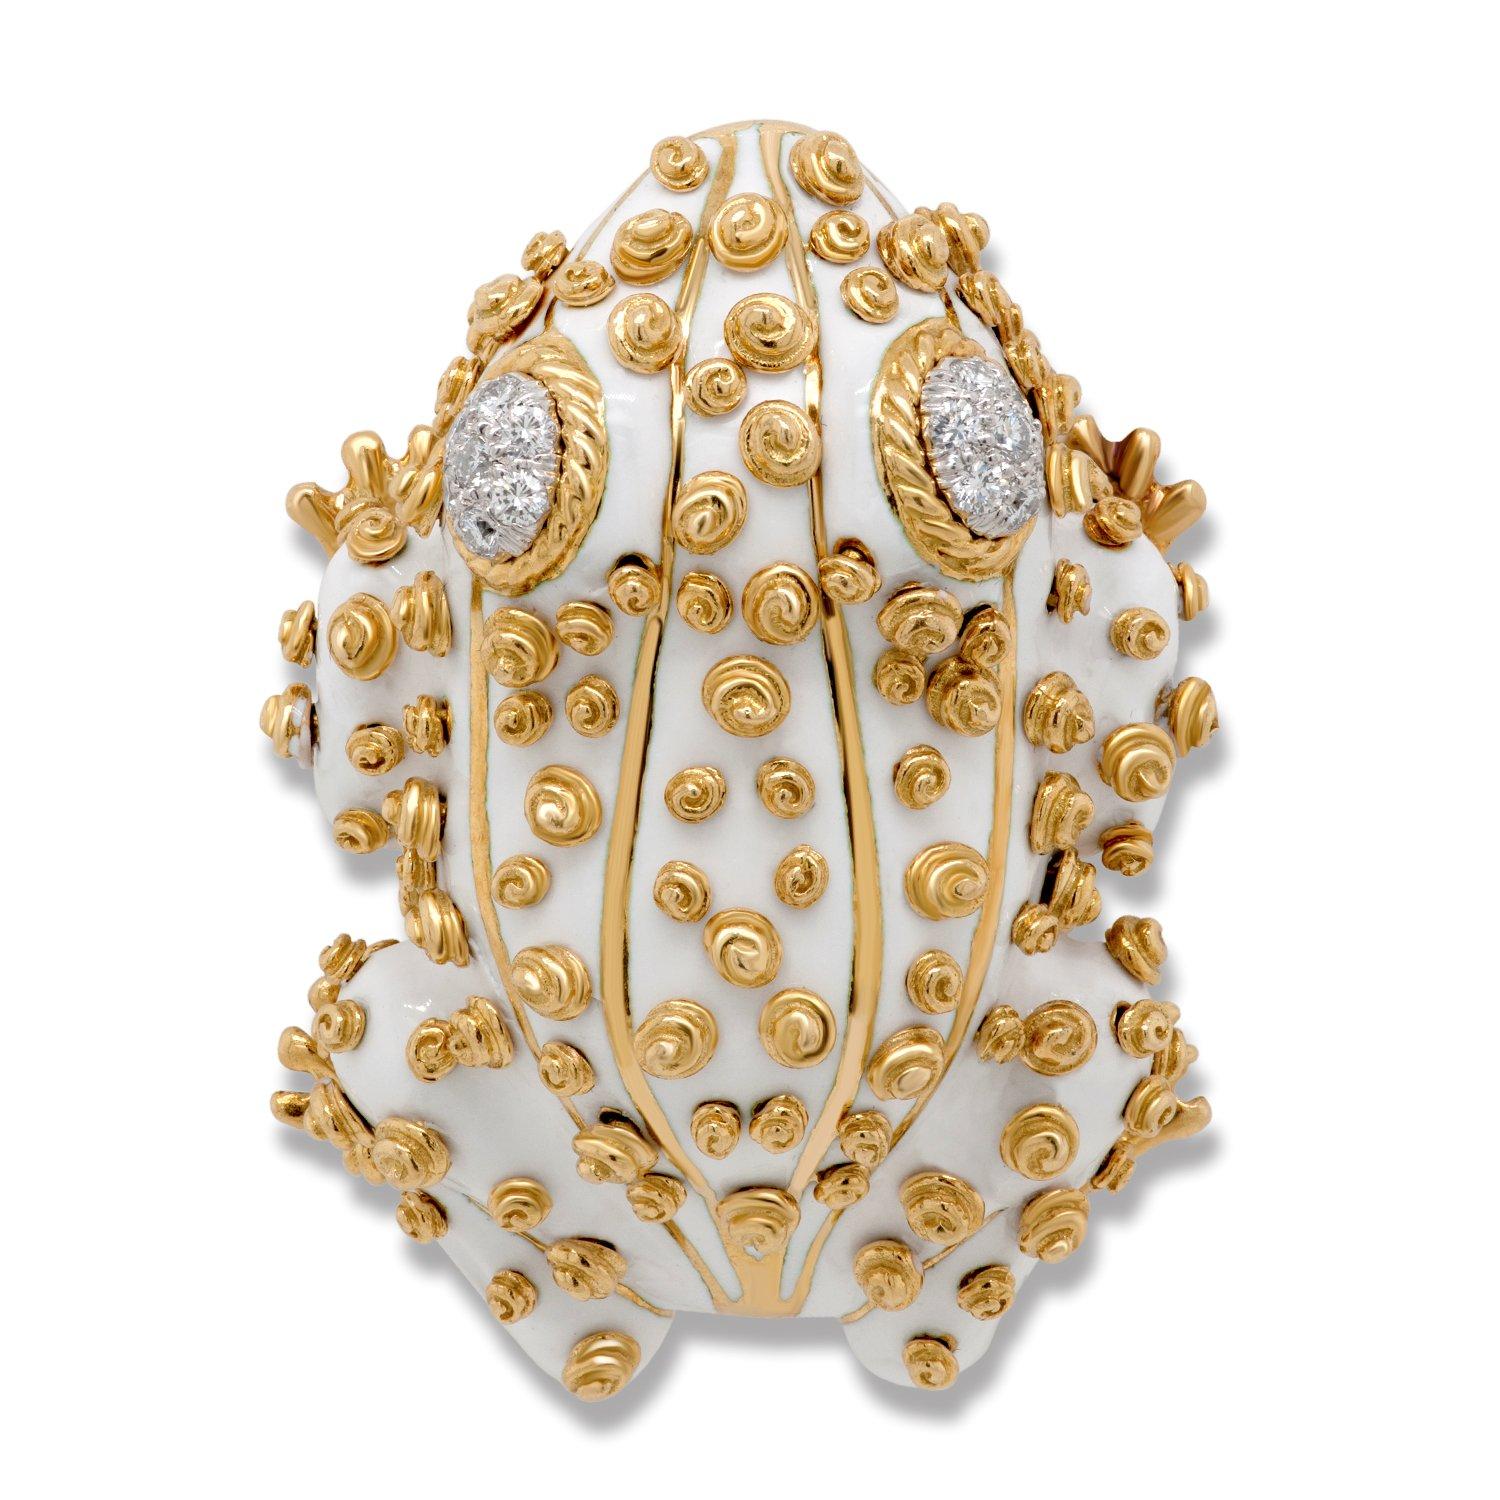 This iconic whimsical David Webb brooch set features two vintage white enamel frogs with diamond eyes set in 18k yellow gold, each accompanied by a David Webb certificate of authenticity.

The larger frog features 14 round brilliant cut diamonds